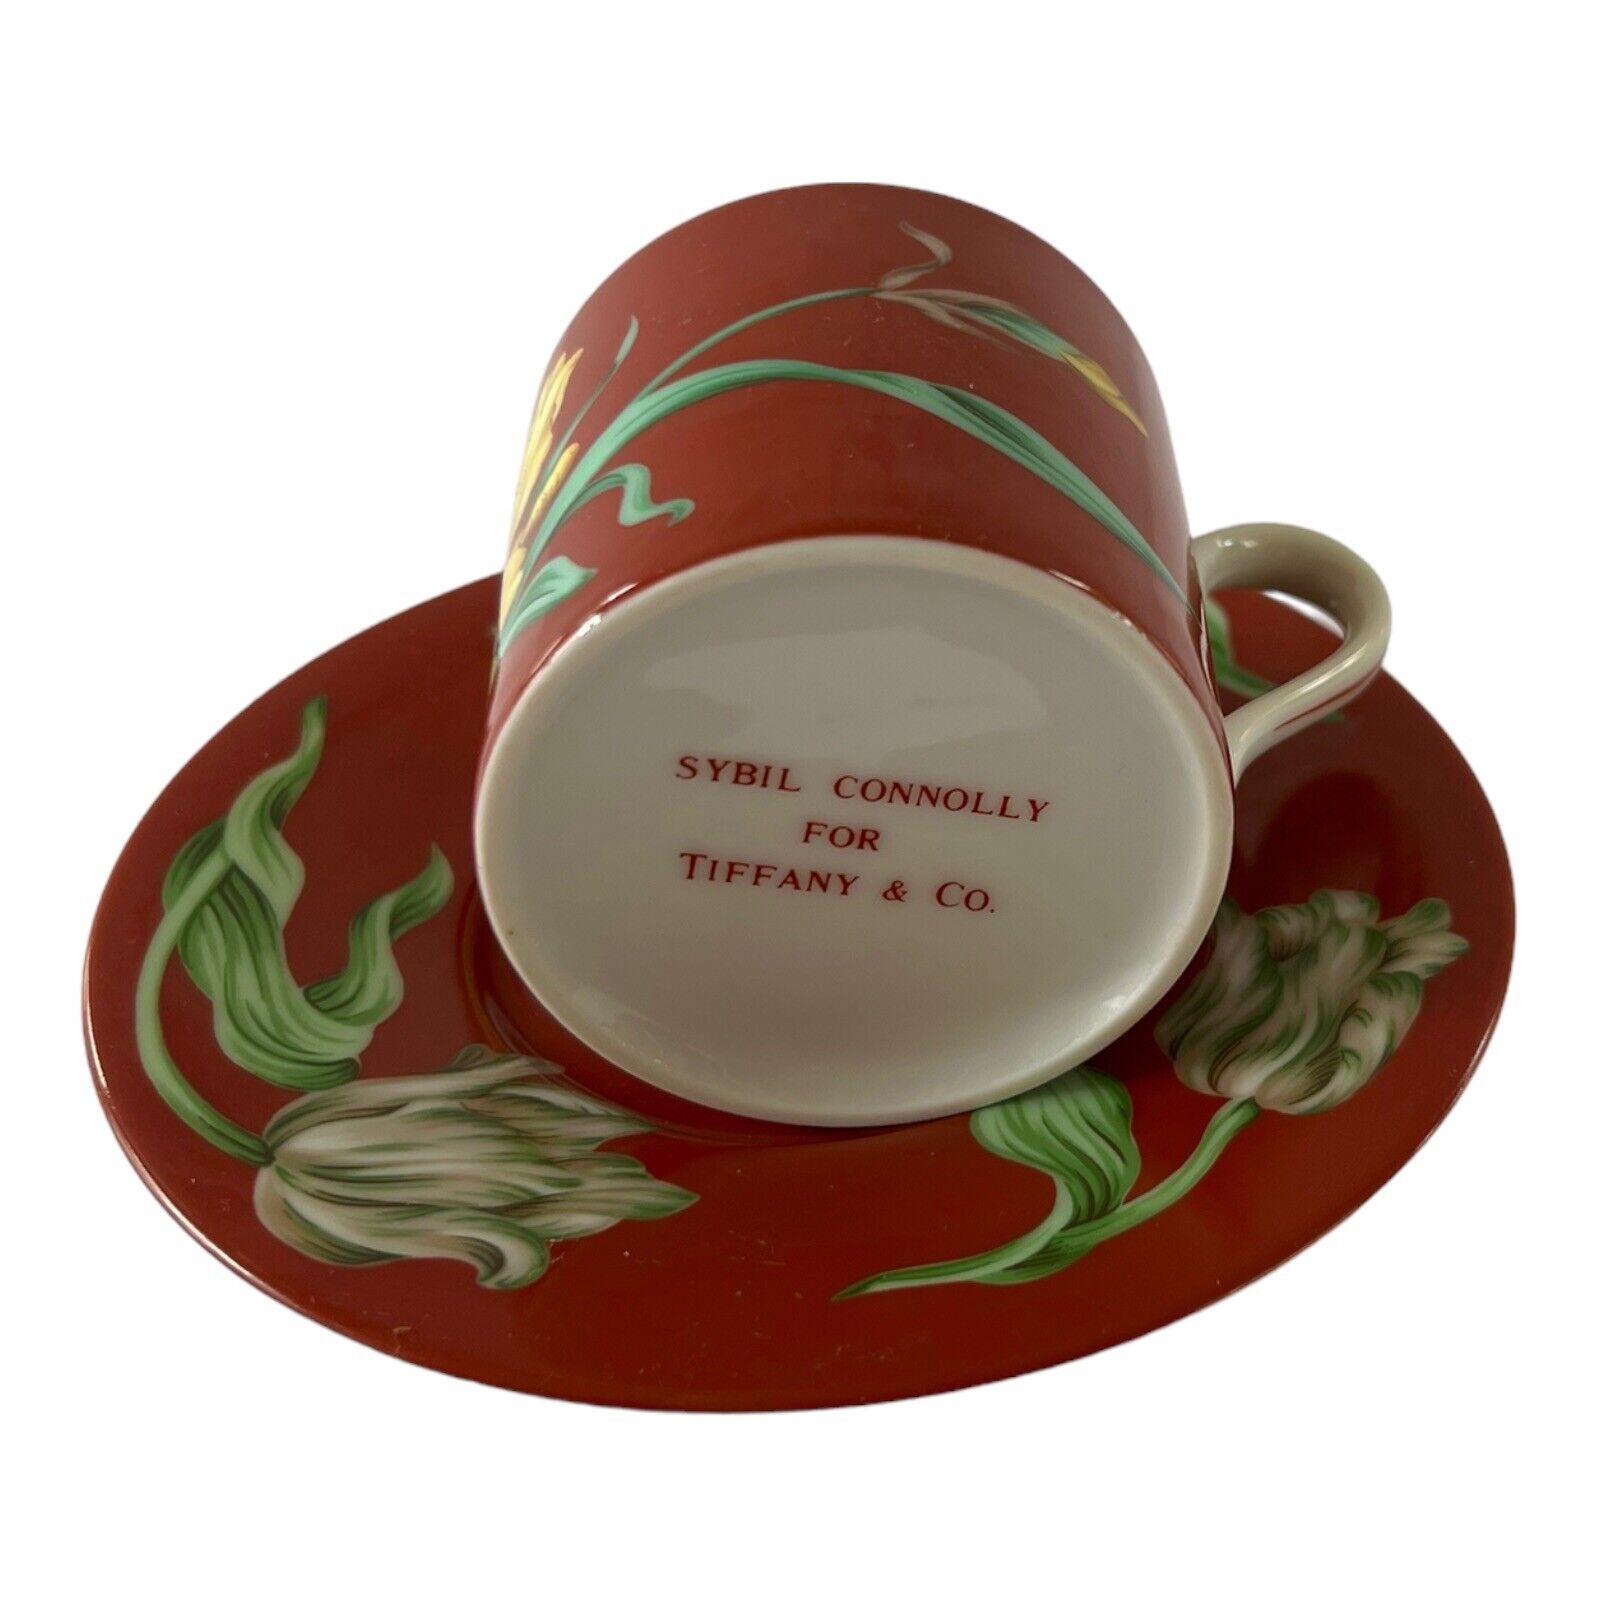 TIFFANY & Co. Vintage Cup & Saucer SYBIL CONNOLLY Red Flower 